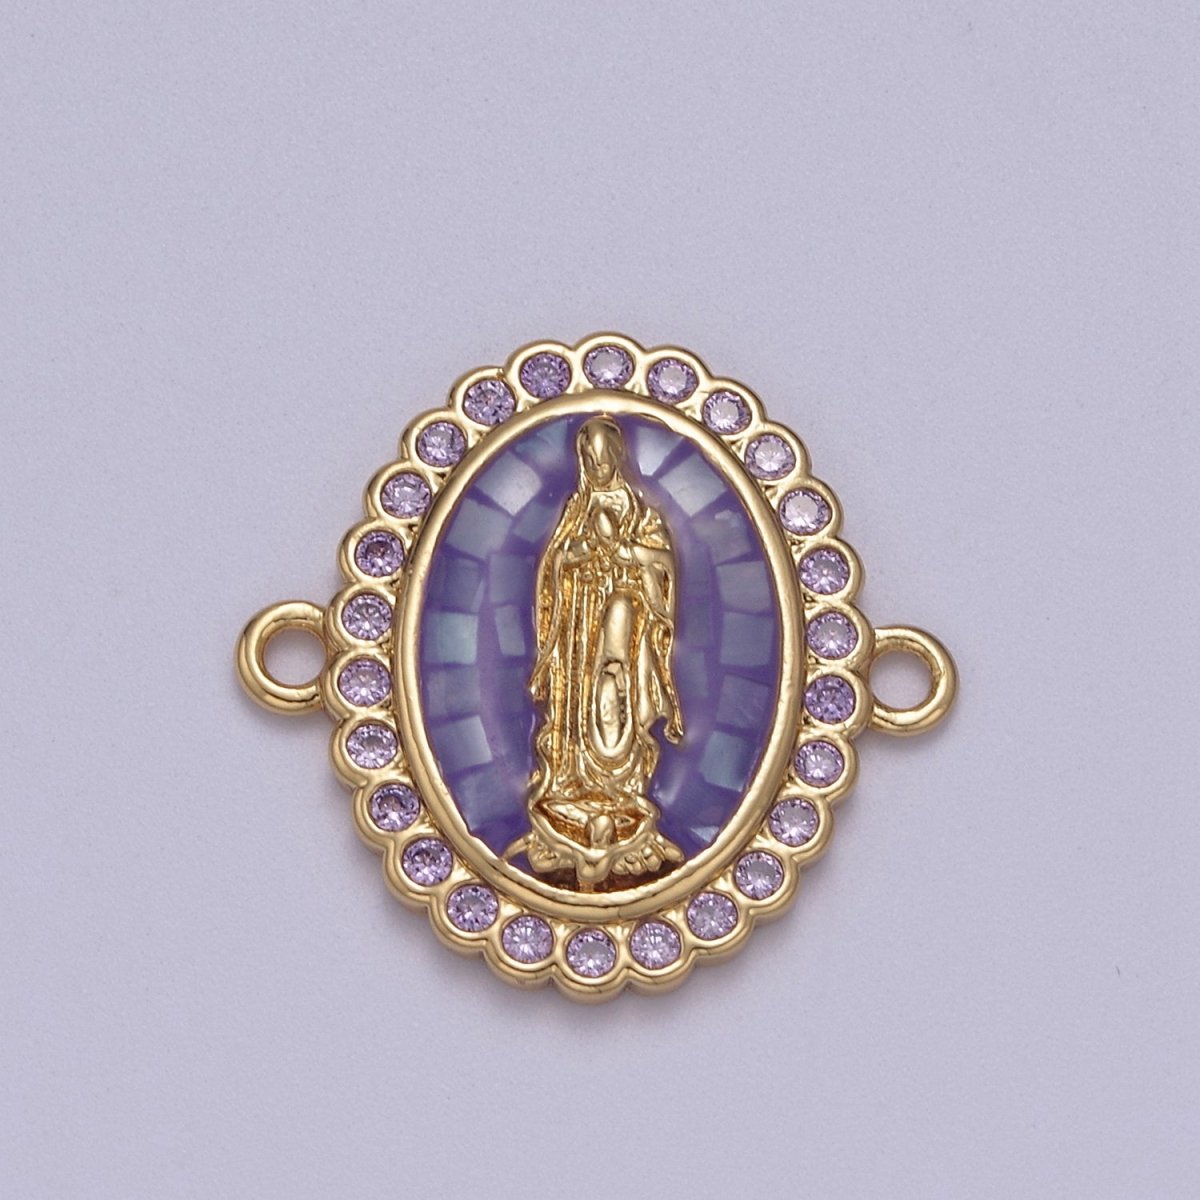 24k Gold Filled Micro Pave Lady Guadalupe Charm Connector, CZ Pave Virgin Mary Charm For Necklace, Bracelet Jewelry Making N-147 - N-156 - DLUXCA